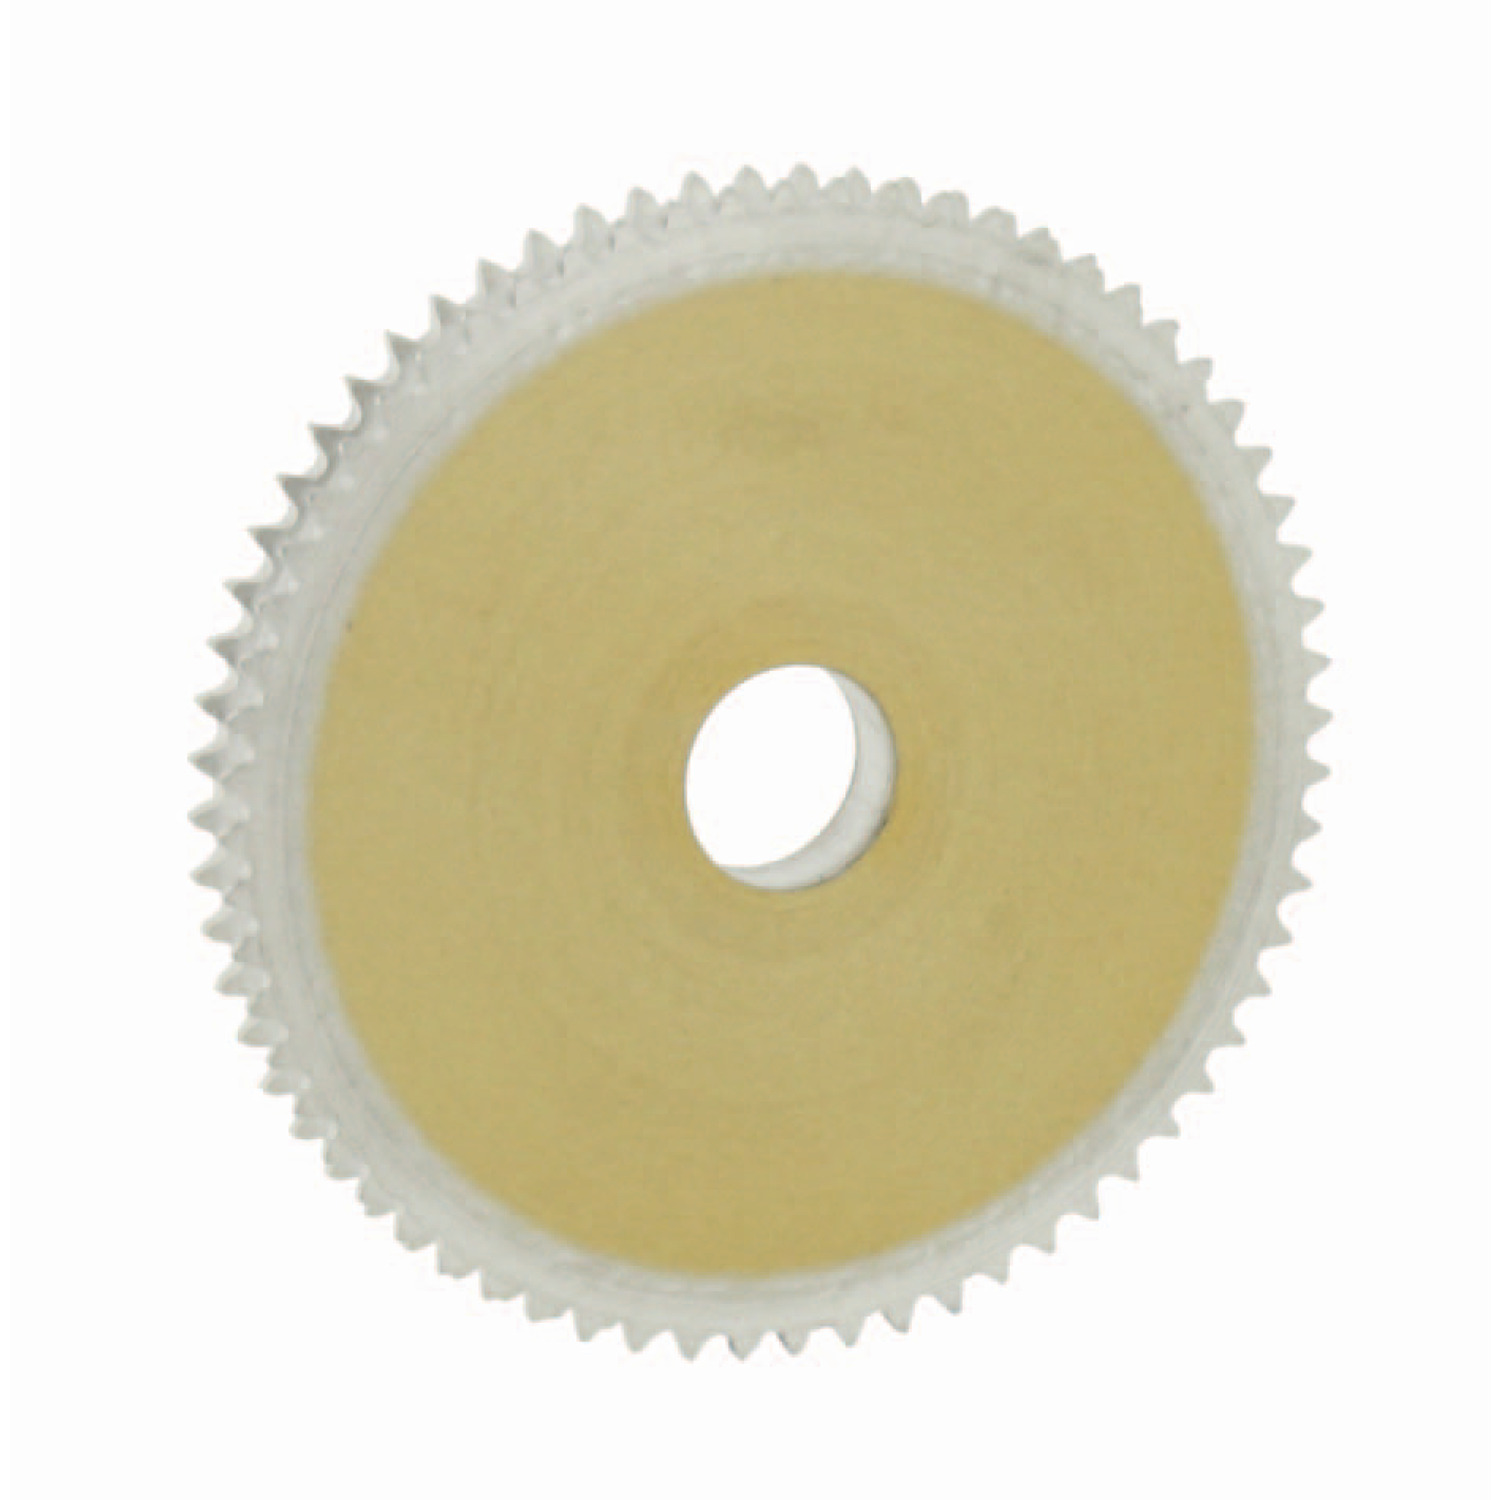 R1043 - Hubless Double Sprockets